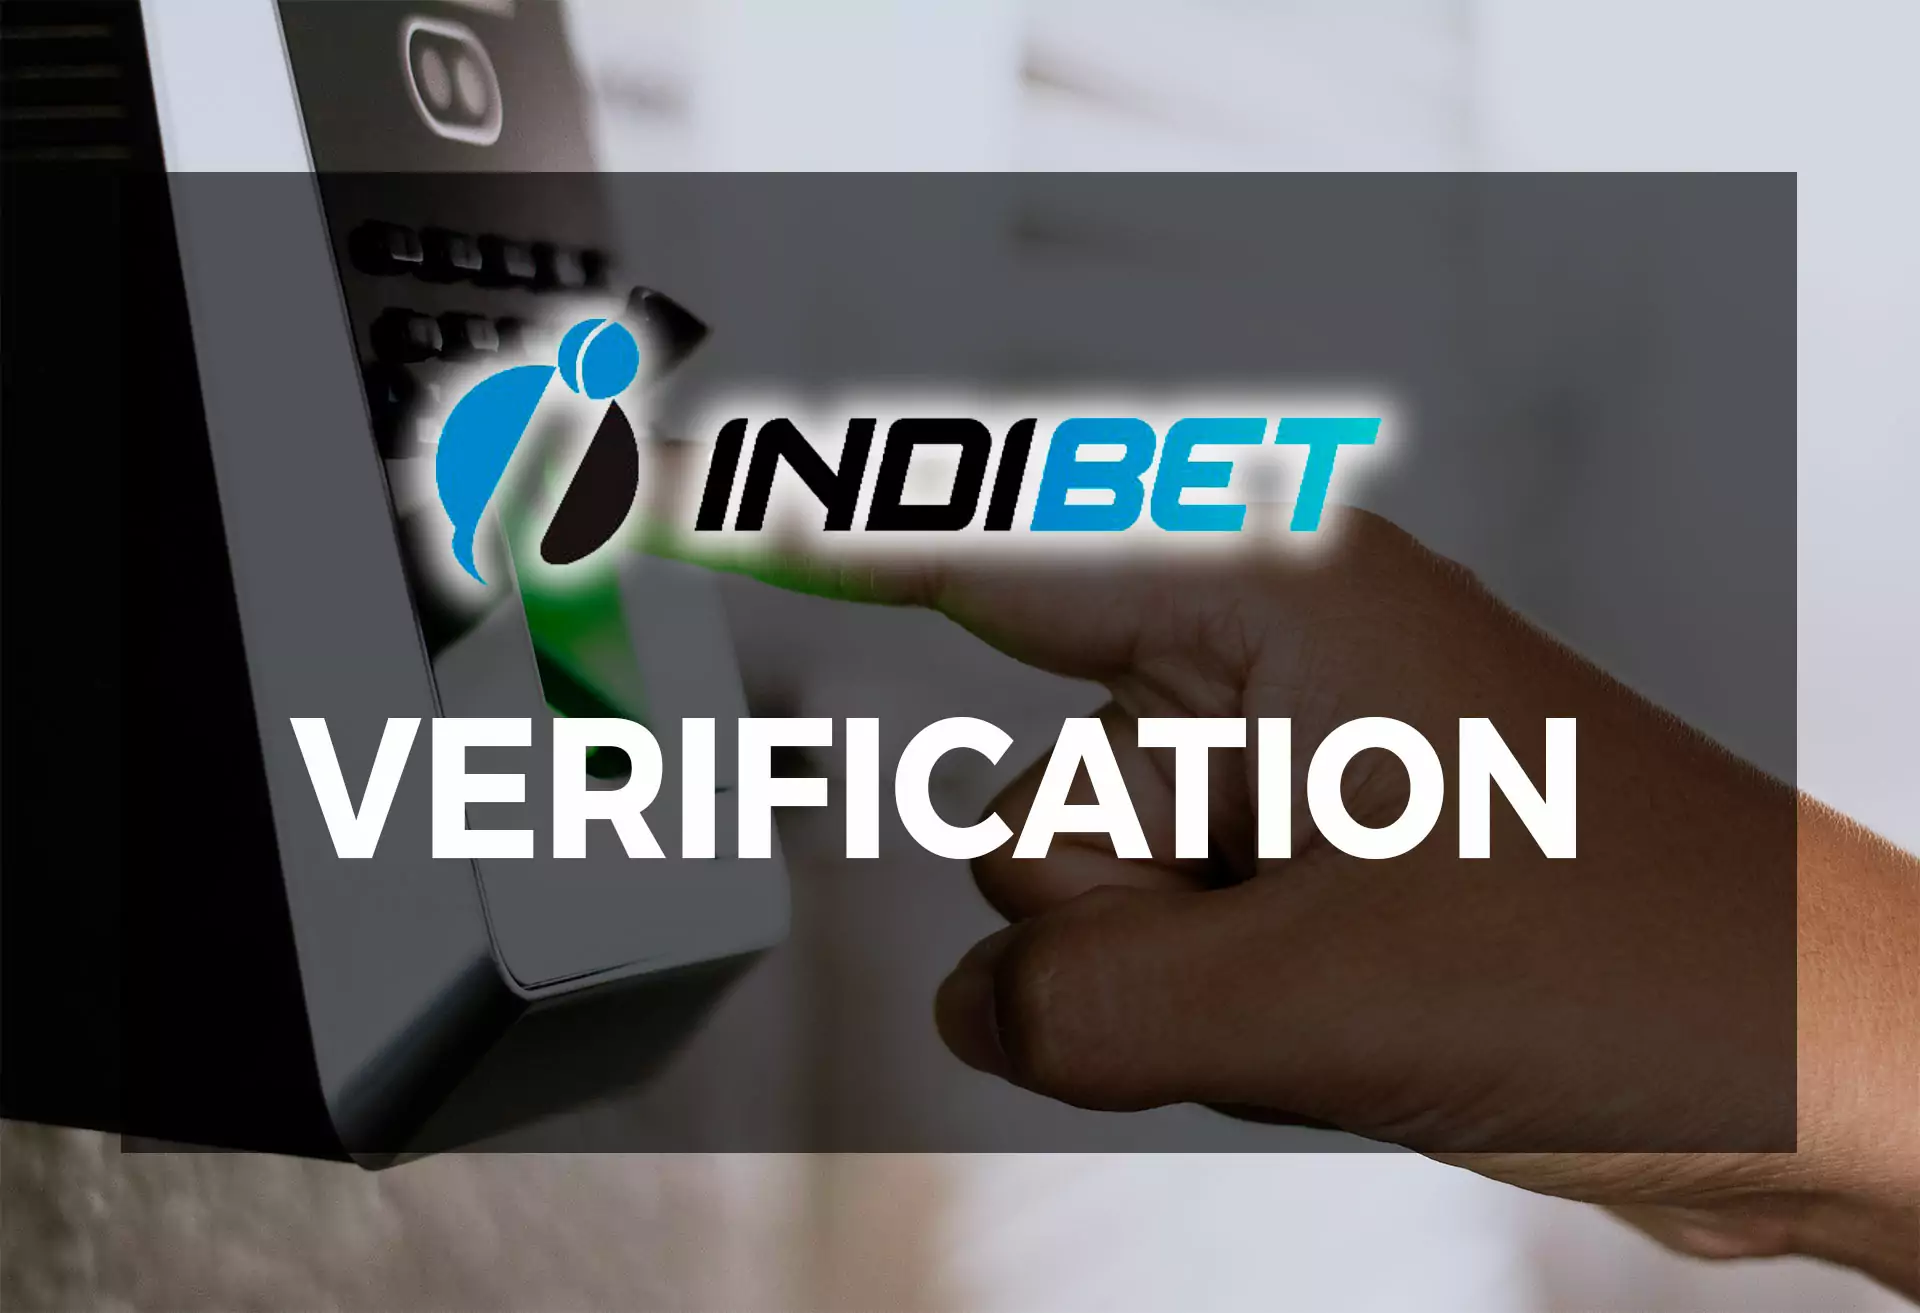 Verification is crucial if you want to withdraw money from your Indibet account.